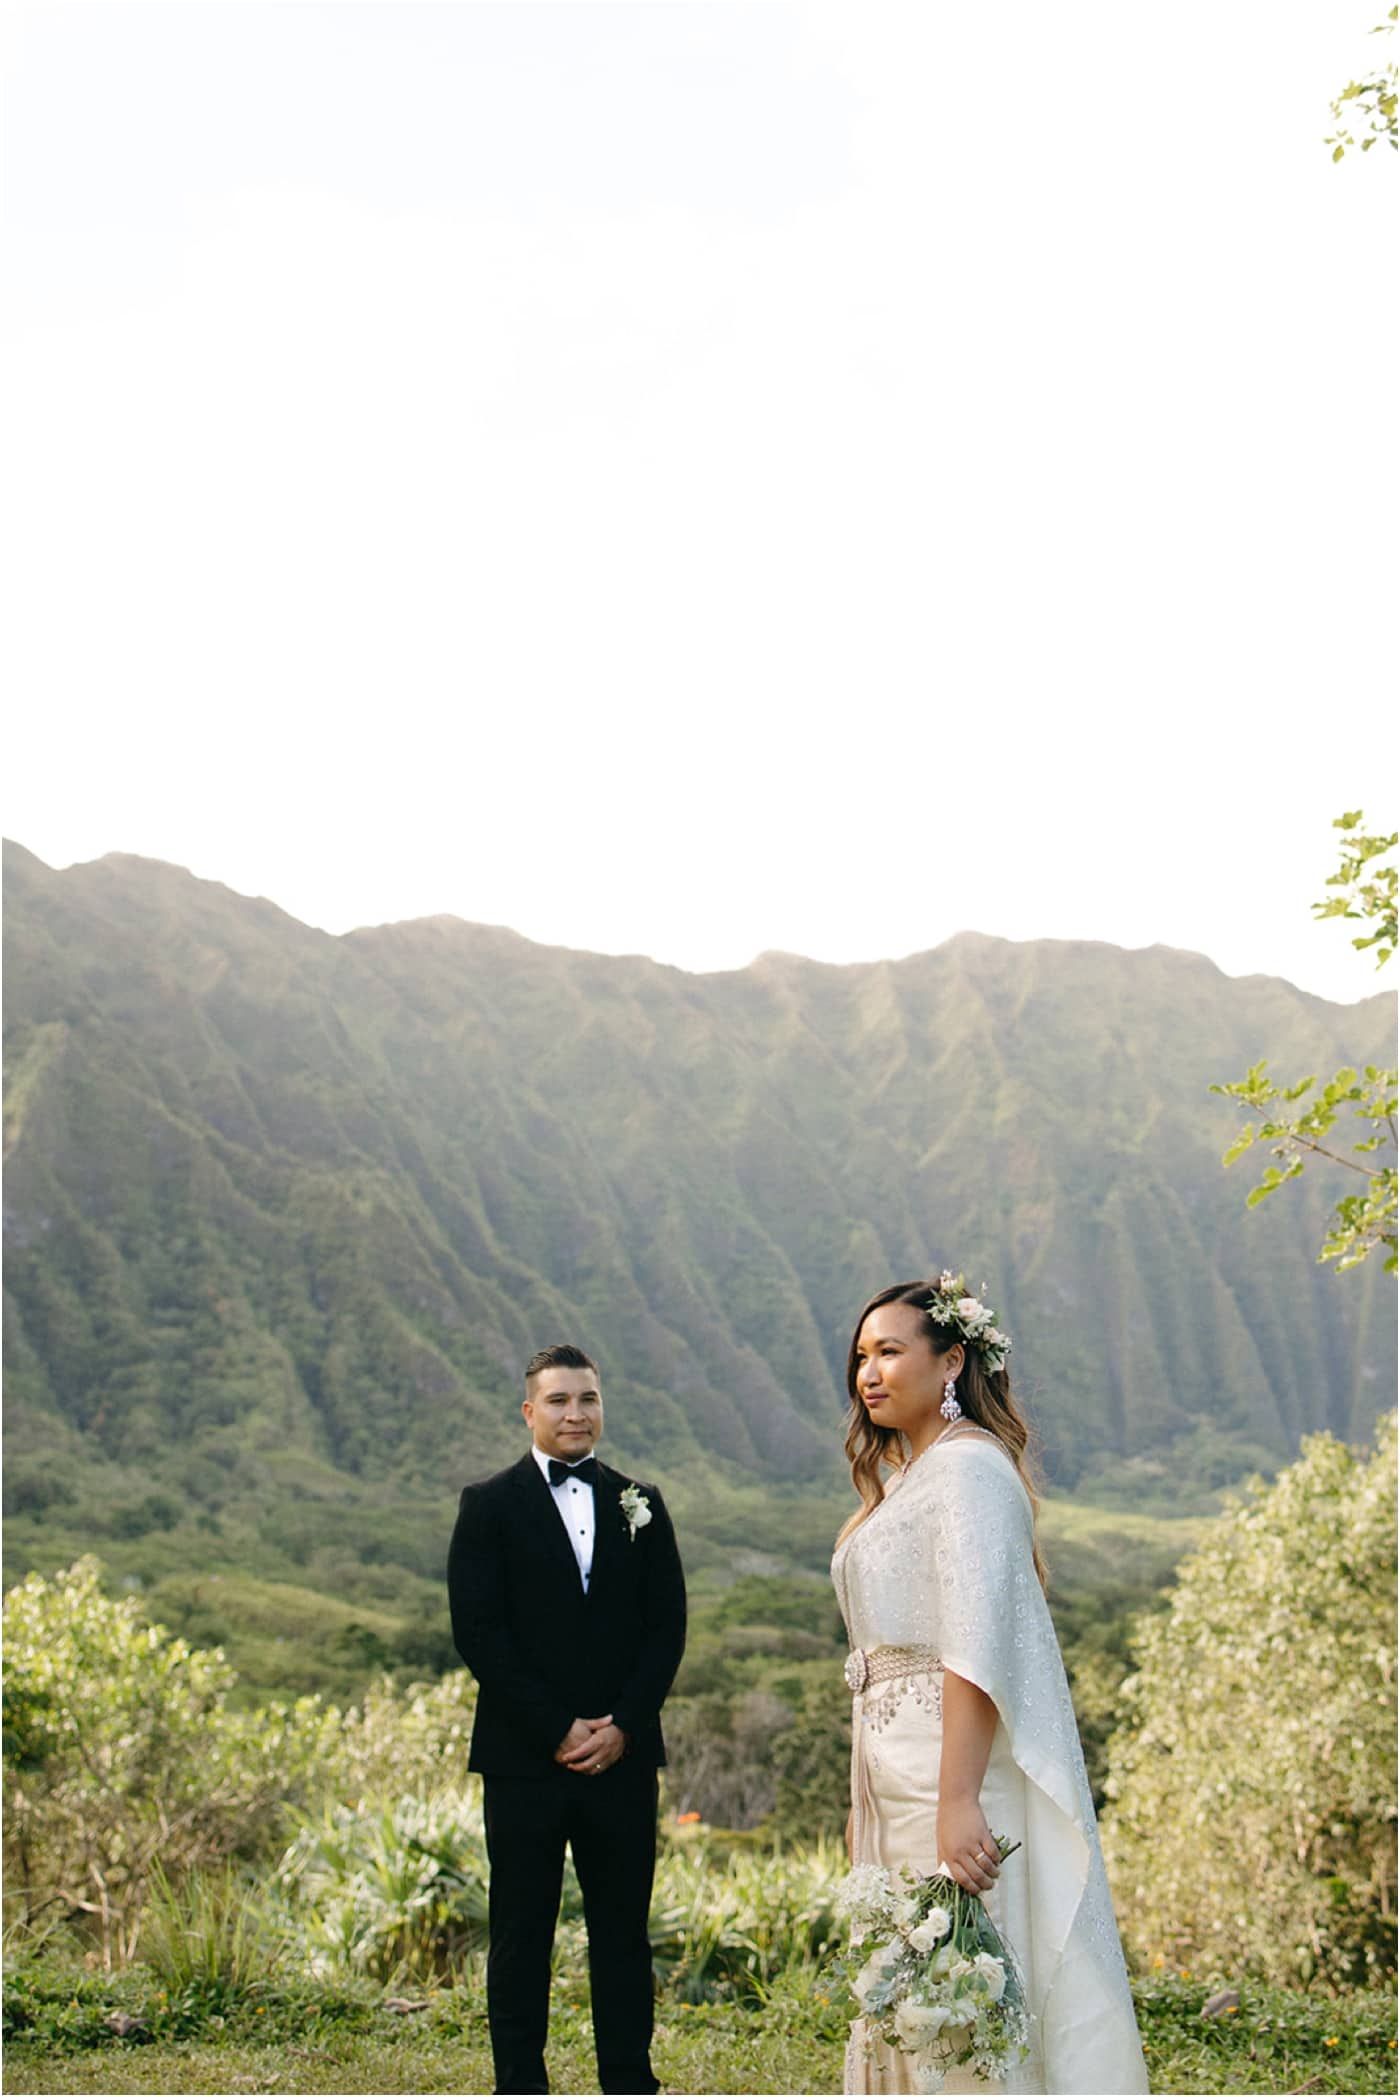 How to Elope with Family - Hawaii elopement photographer